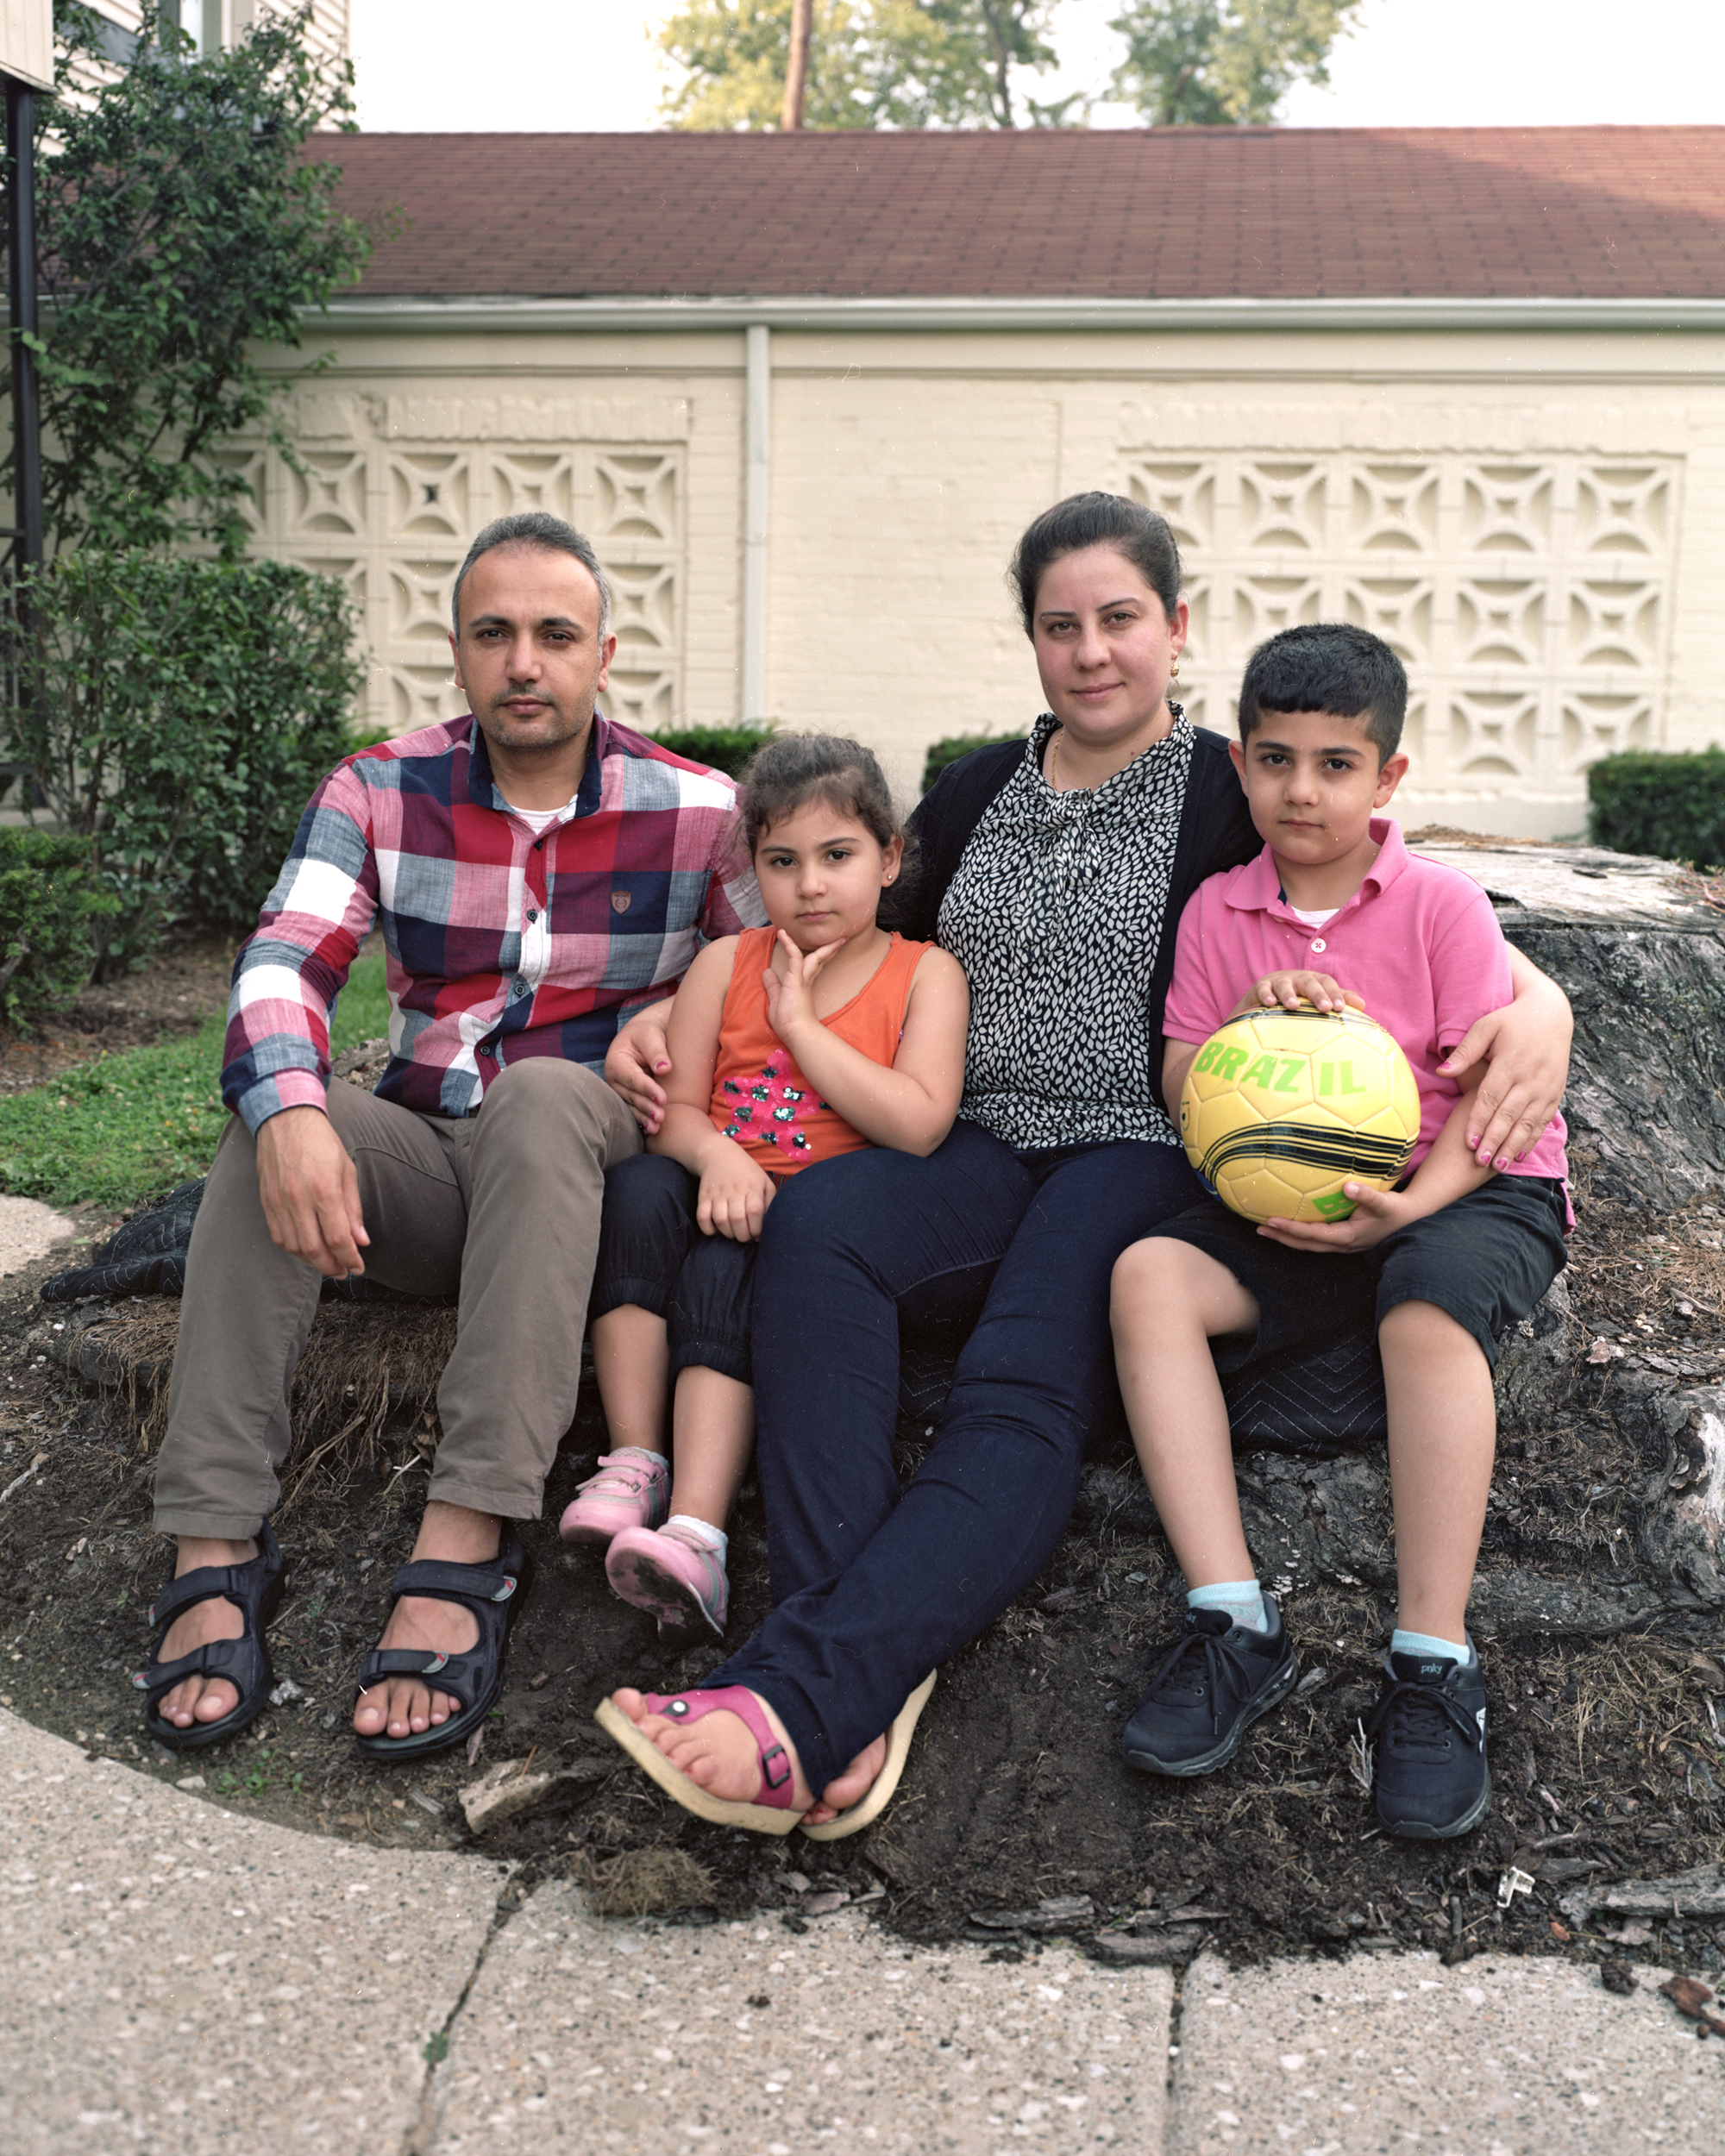 Newly Arrived Family from Syria in Toledo, Ohio (2016)